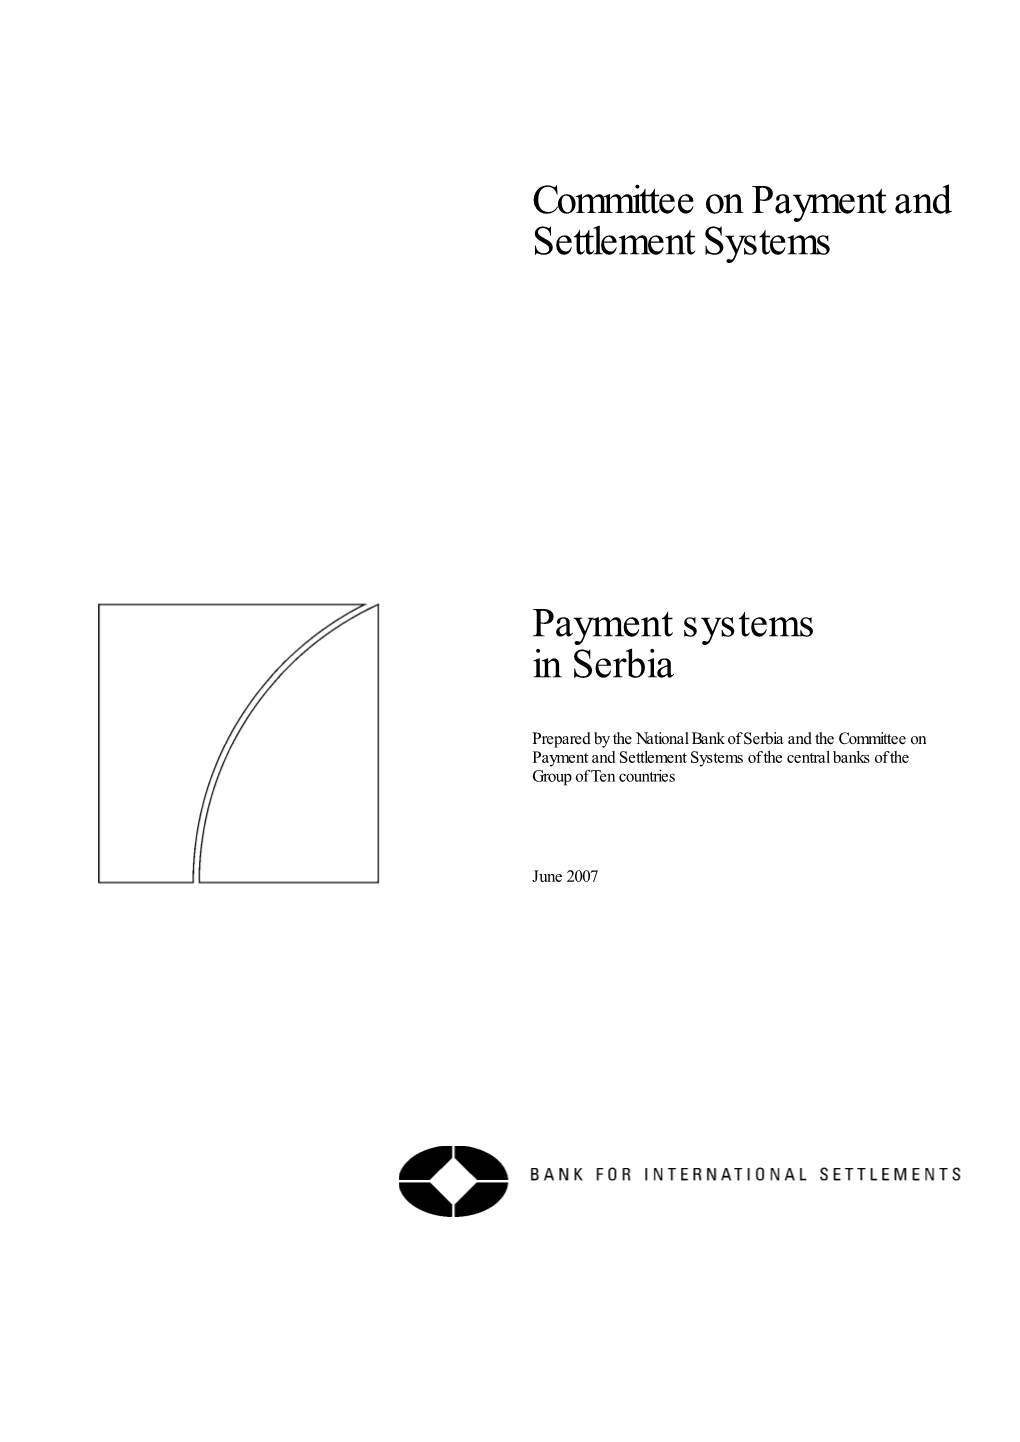 Payment Systems in Serbia